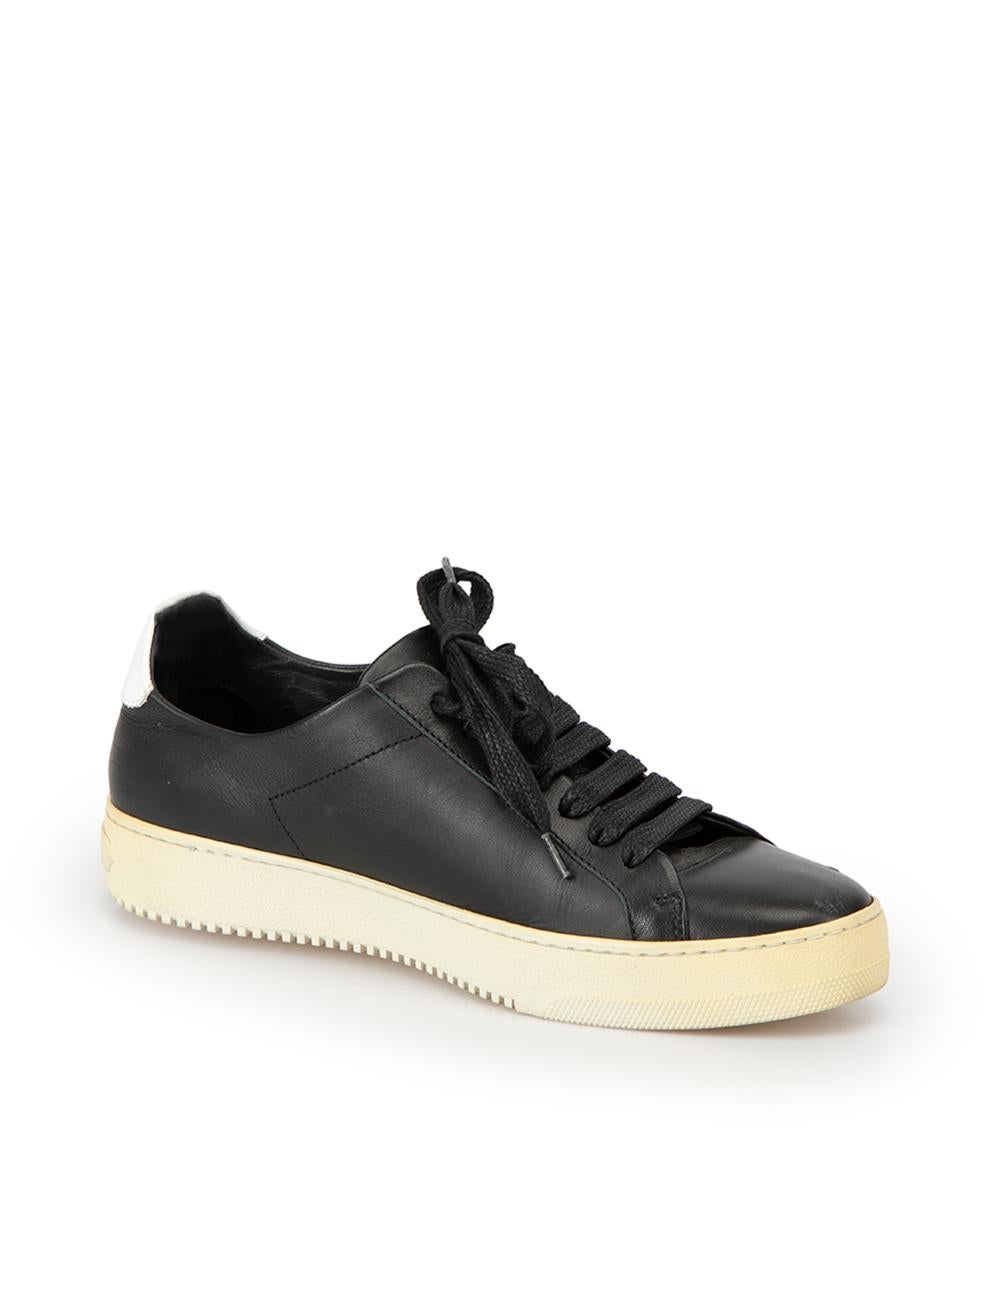 CONDITION is Very good. Minimal wear to these trainers is evident. Small scuff to toe of left trainer. Minor creasing along outer back heel and along toe crease of this used Off-White designer resale item
 
 Details
  Black
 Leather
 Low top